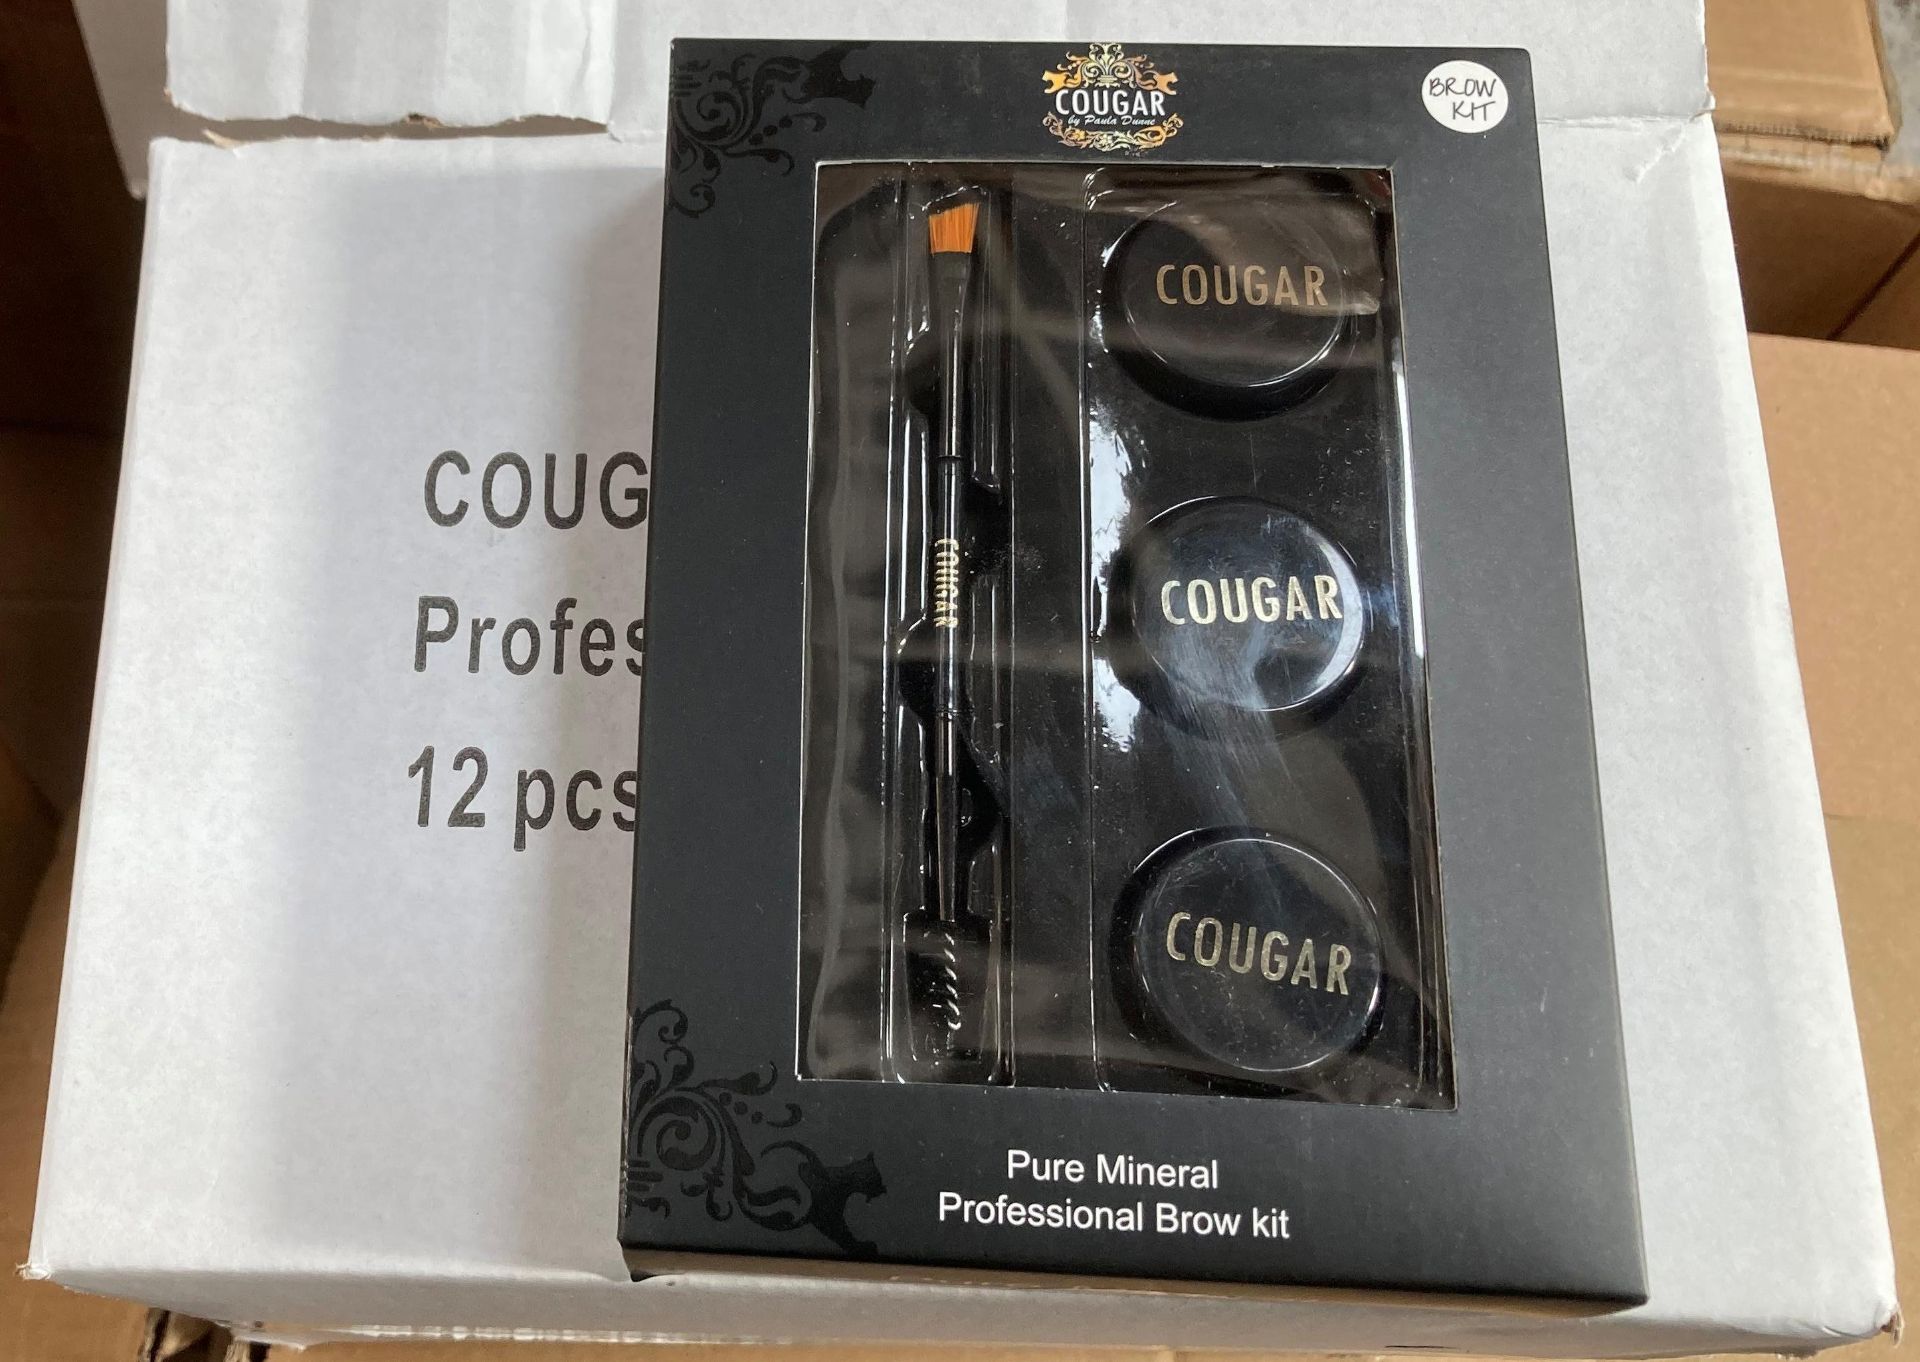 Two boxes of Cougar Pure Mineral Professional Brow Kits (12 units per box)